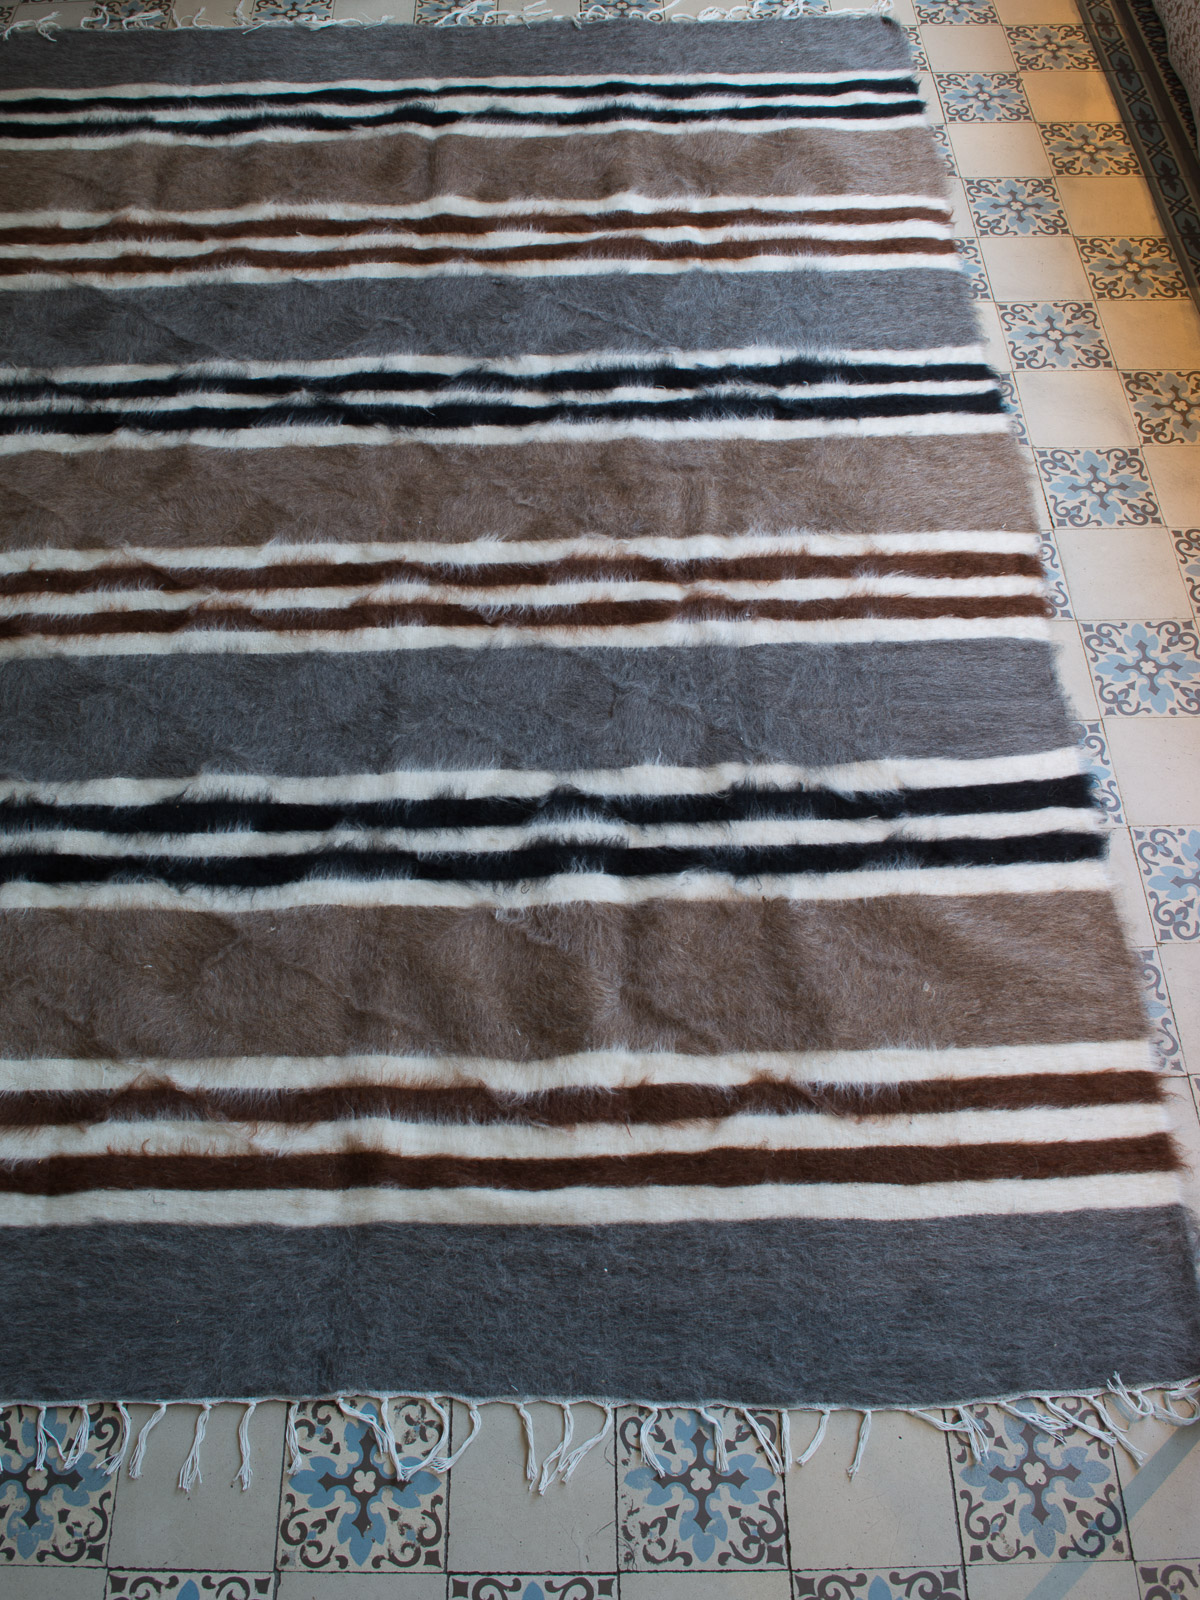 mohair blanket grey with beige, black and brown